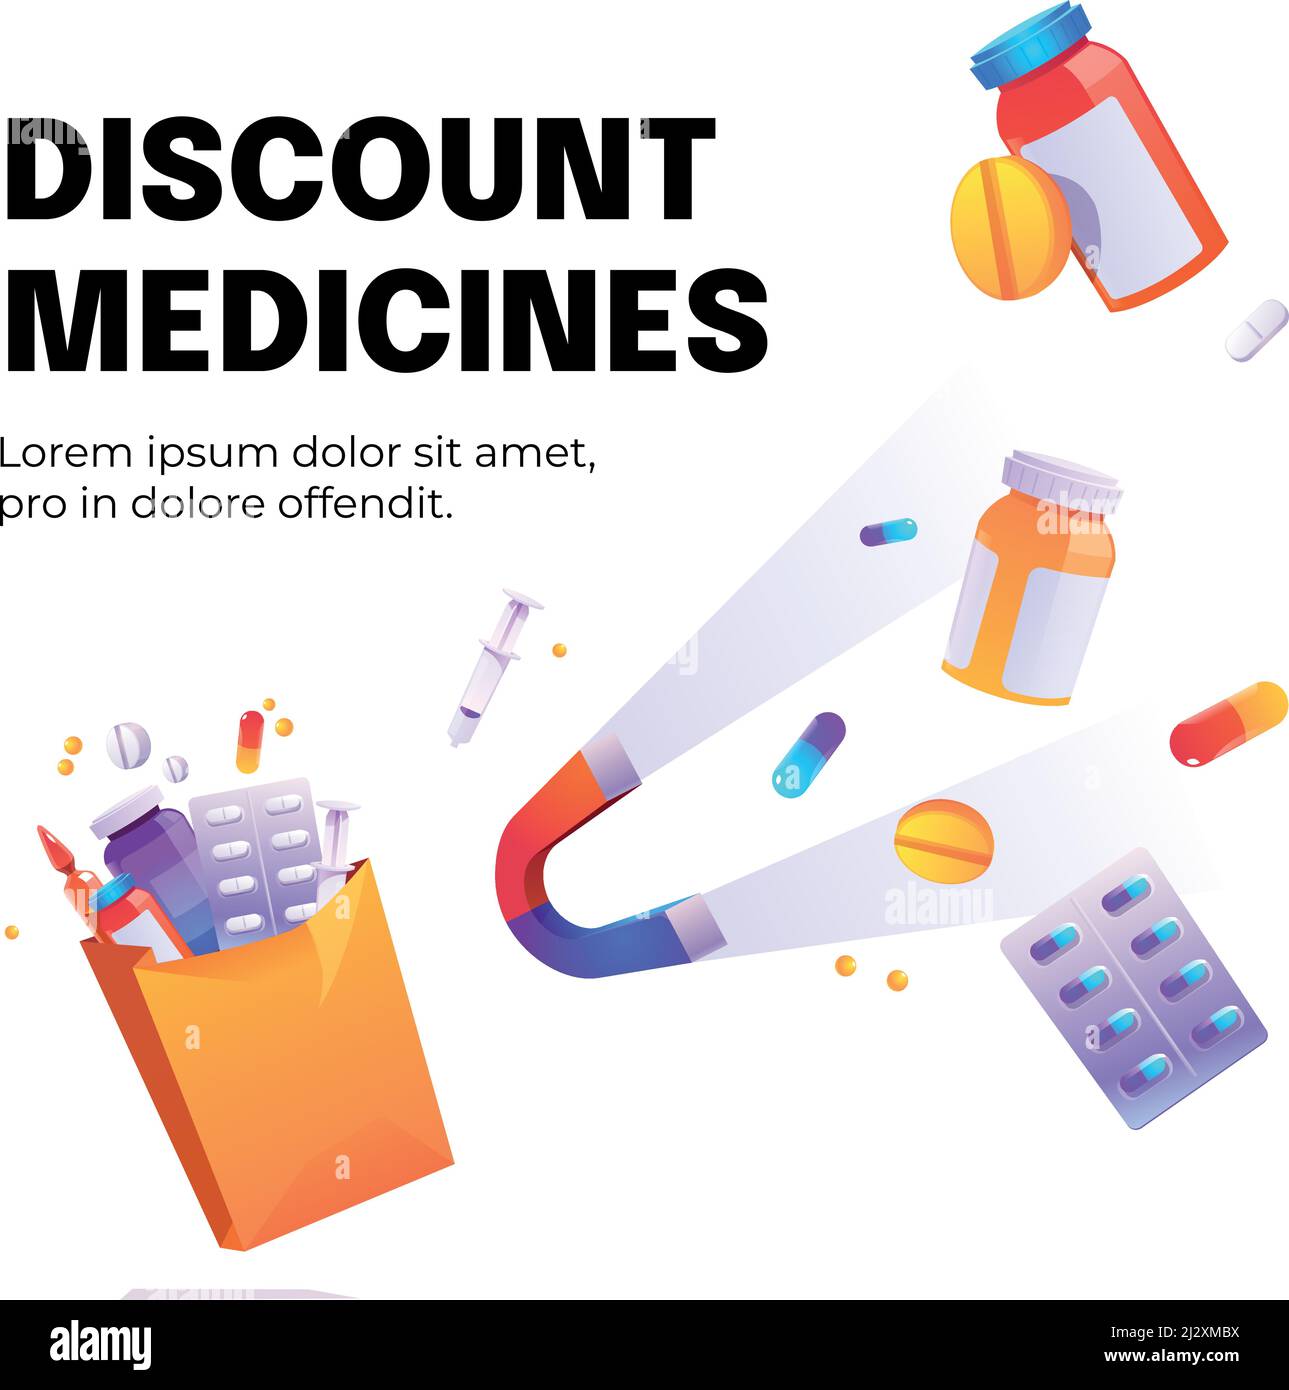 Discount medicines cartoon poster with magnet attract drugs, syringe and medical pills in bottles, ampoule and blisters. Price off promotion, health c Stock Vector